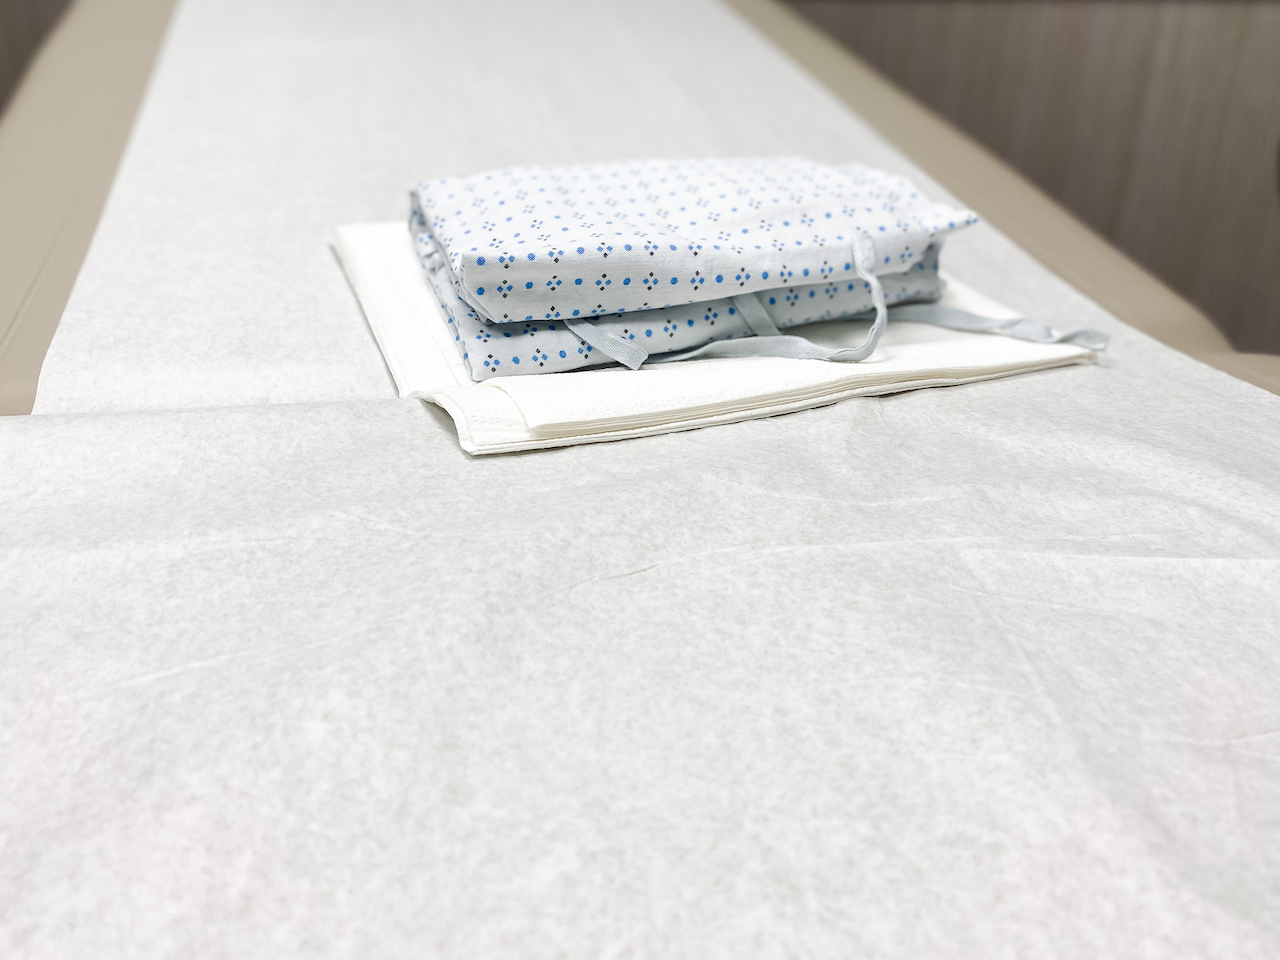 A medical exam table is seen with a folded hospital gown and paper sheet.